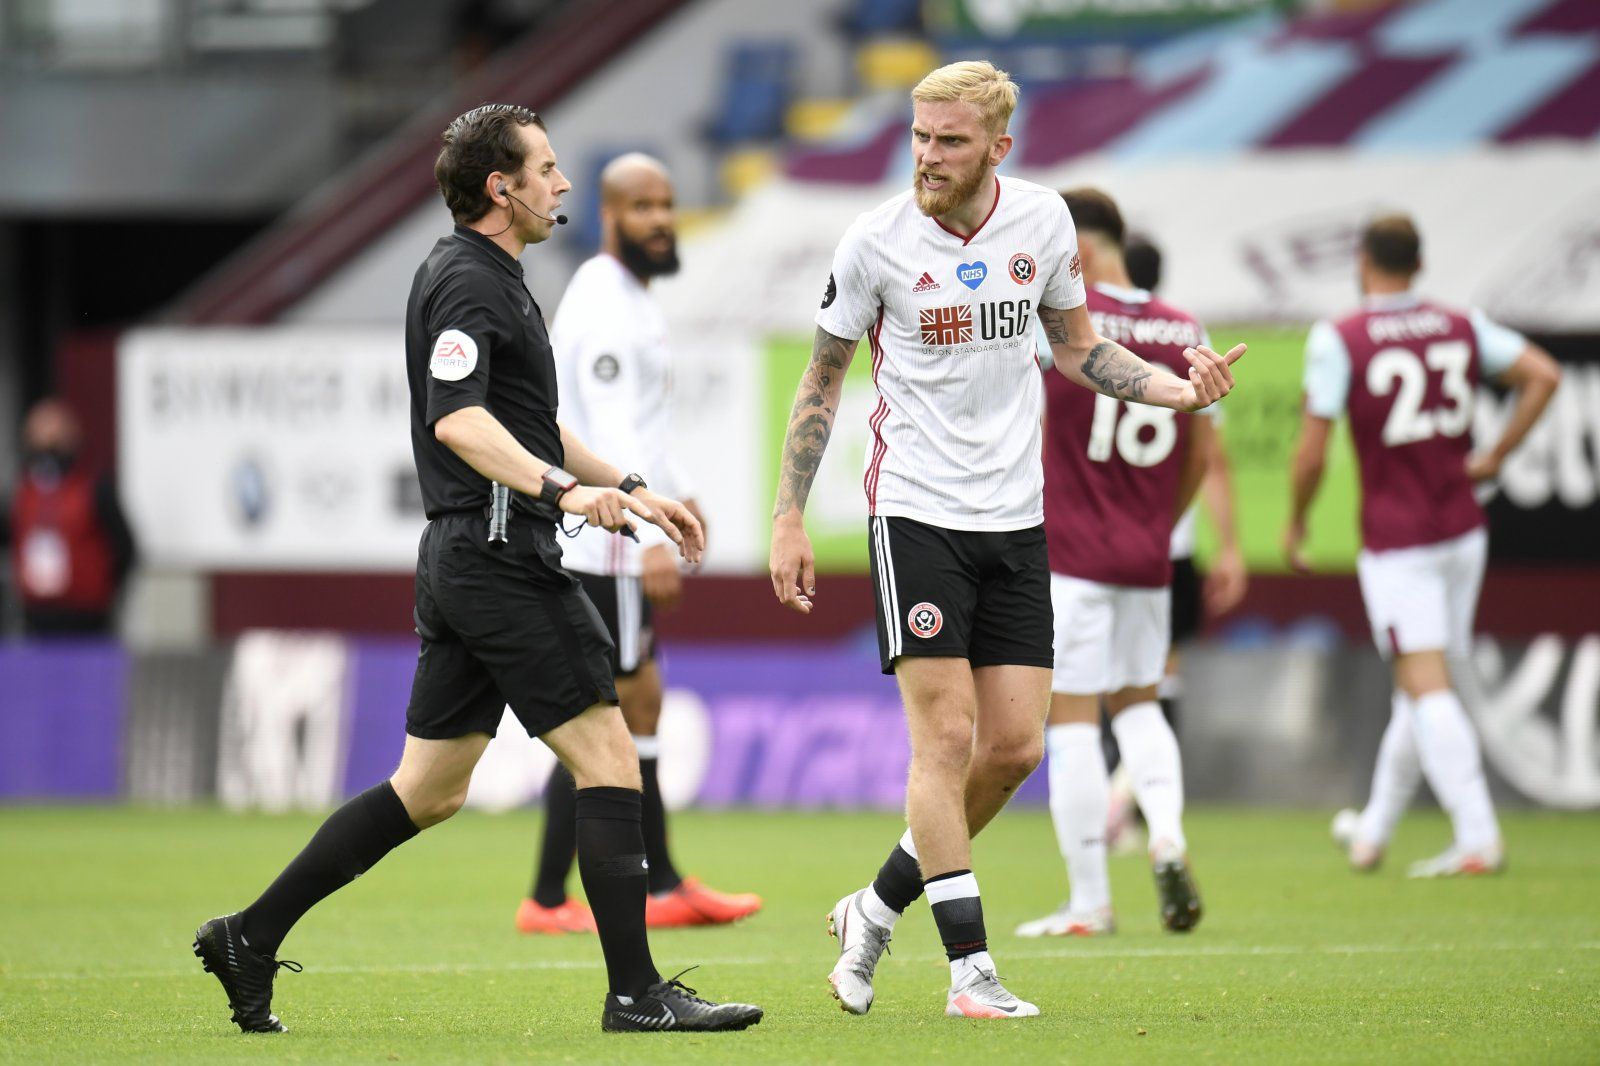 Exclusive: Pundit backs McBurnie to join Southampton and emulate Danny Ings -Southampton Transfer Rumours